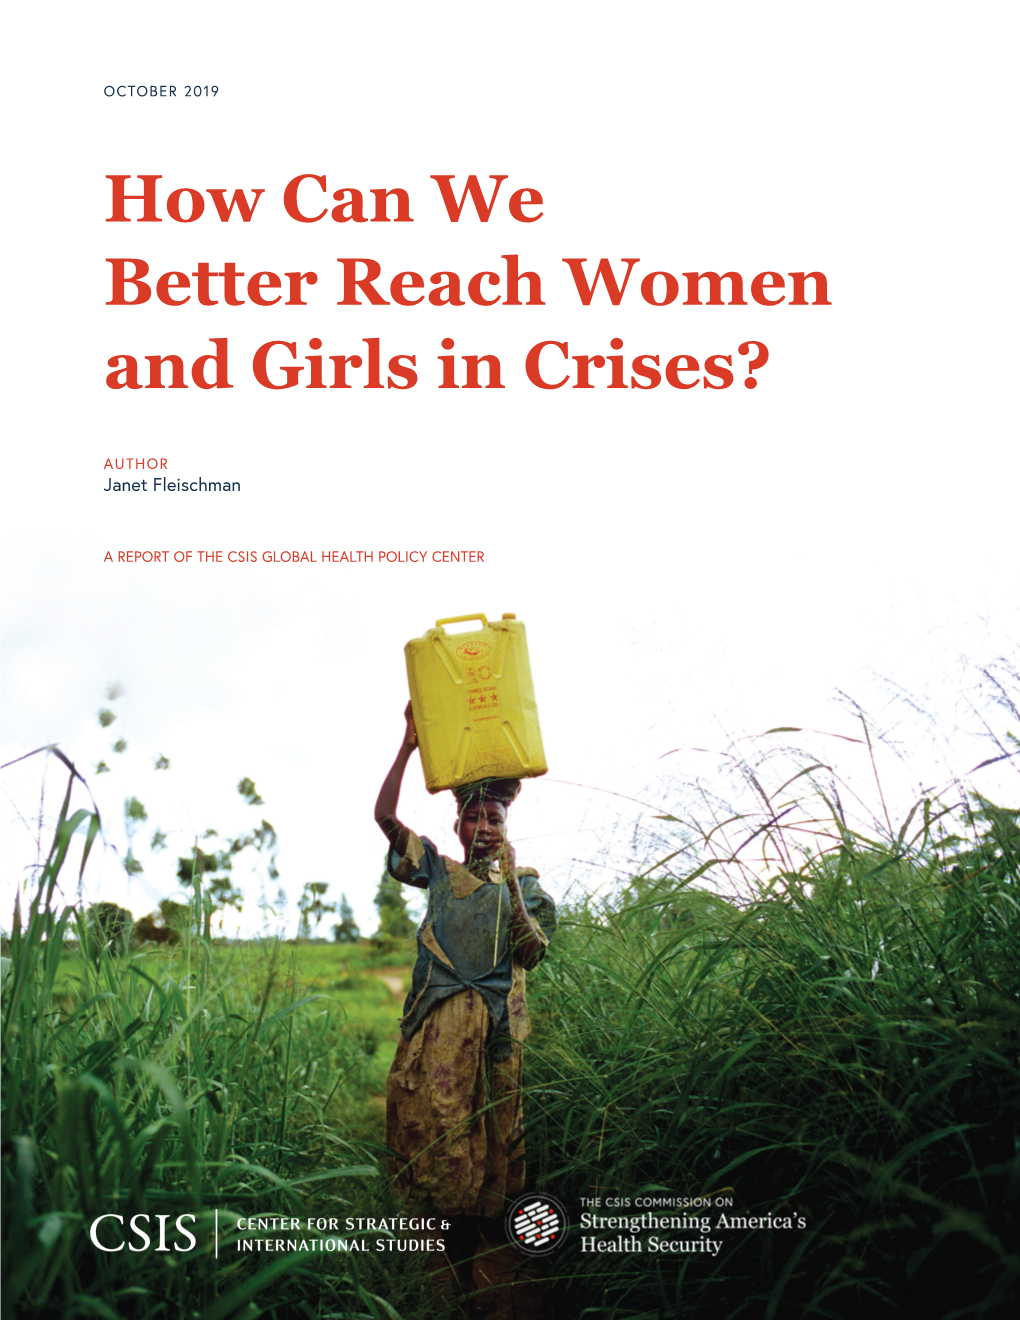 How Can We Better Reach Women and Girls in Crises?